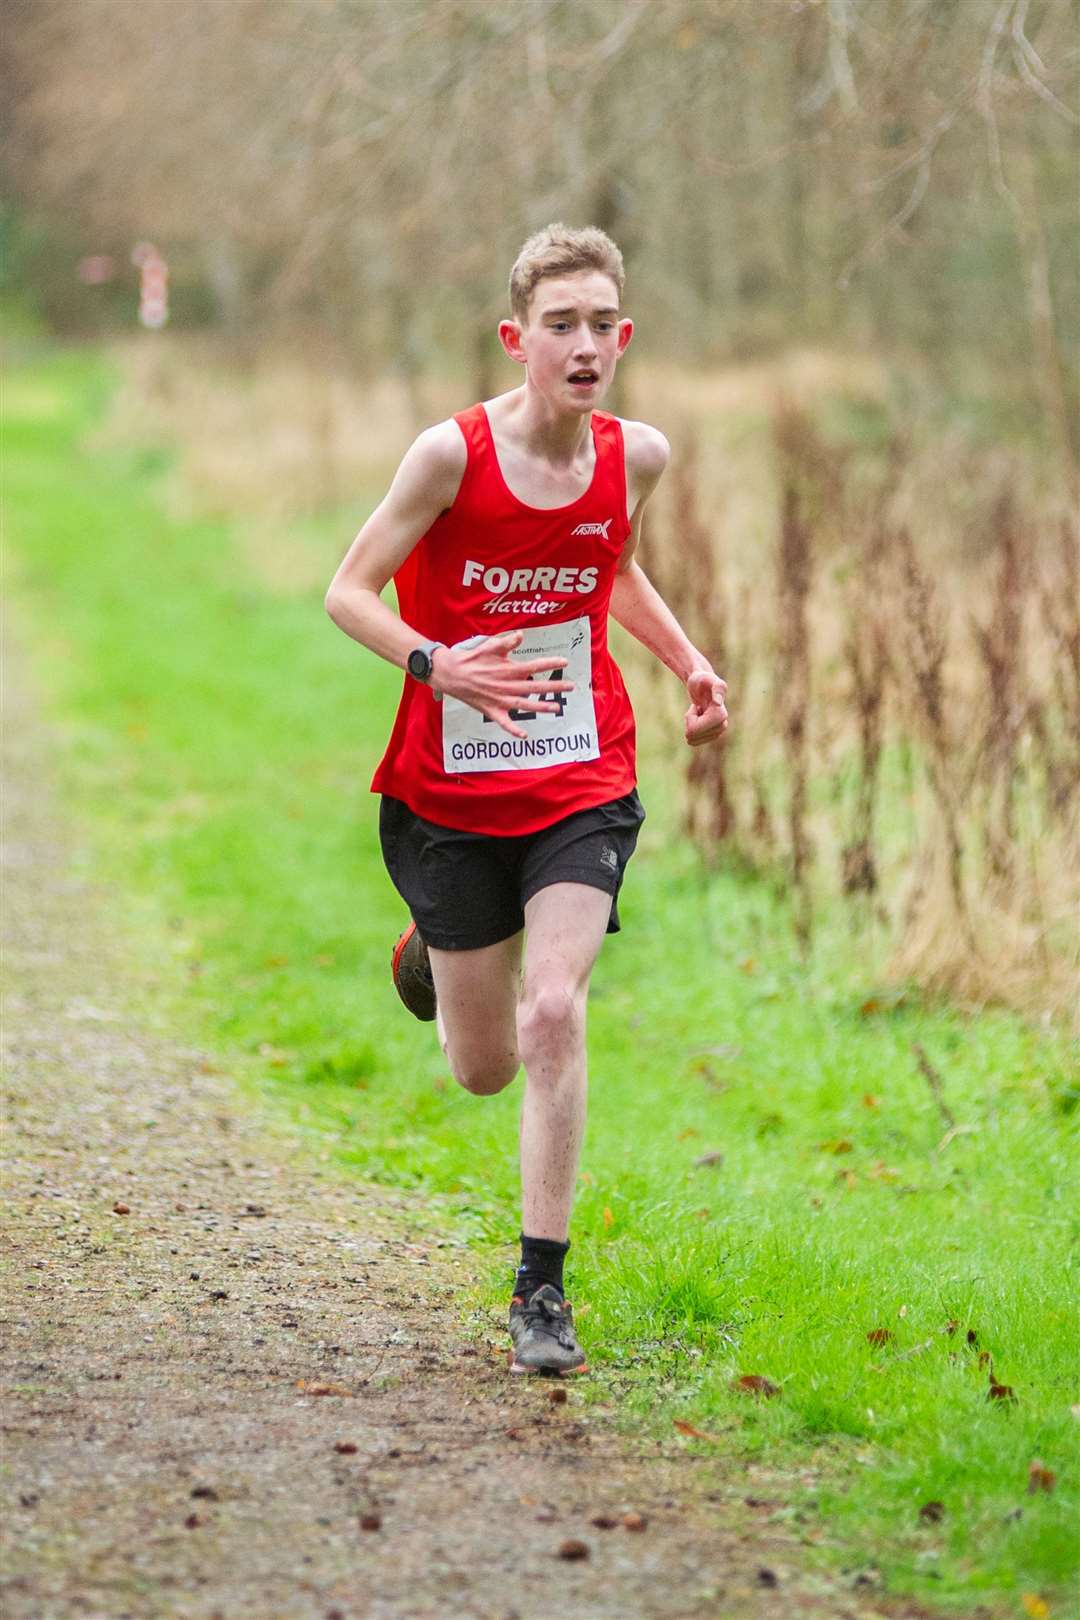 Forres Harriers' Michael Bishenden came second overall in the U15 Boys race with a time of 14:38. Picture: Daniel Forsyth